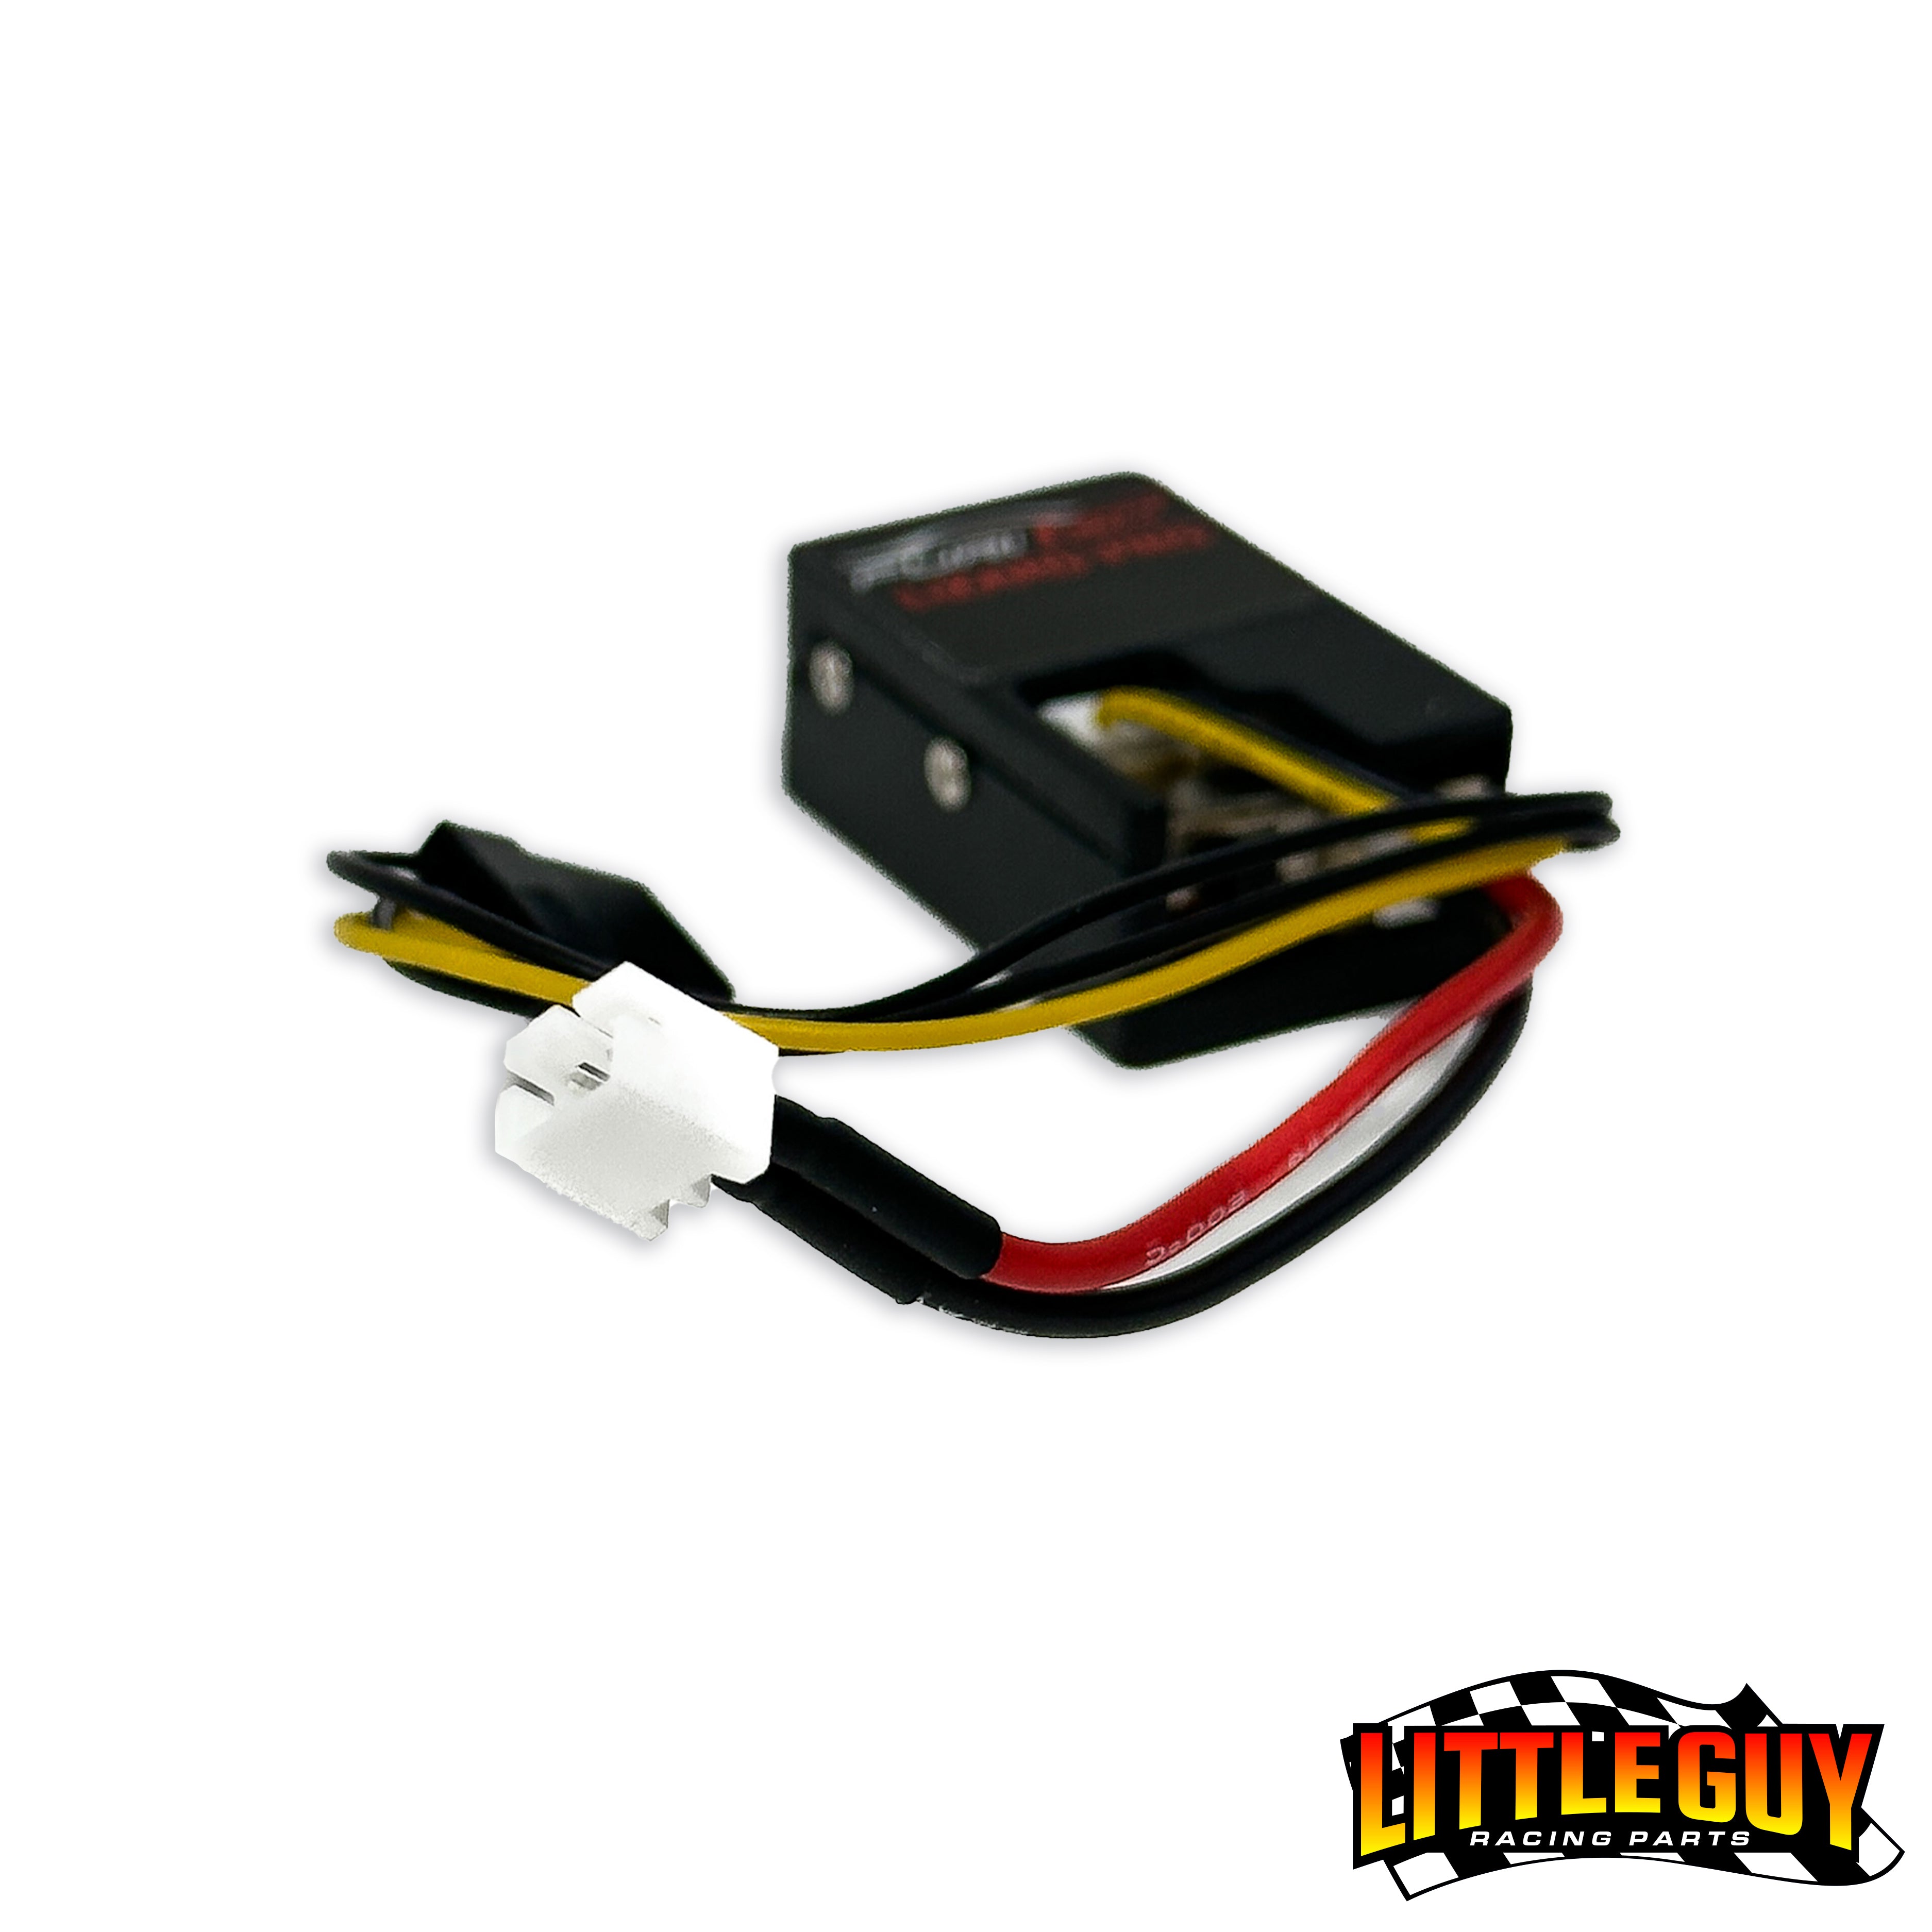 Furitek LIZARD PRO 30A/50A BRUSHED/BRUSHLESS ESC FOR AXIAL SCX24 WITH BLUETOOTH